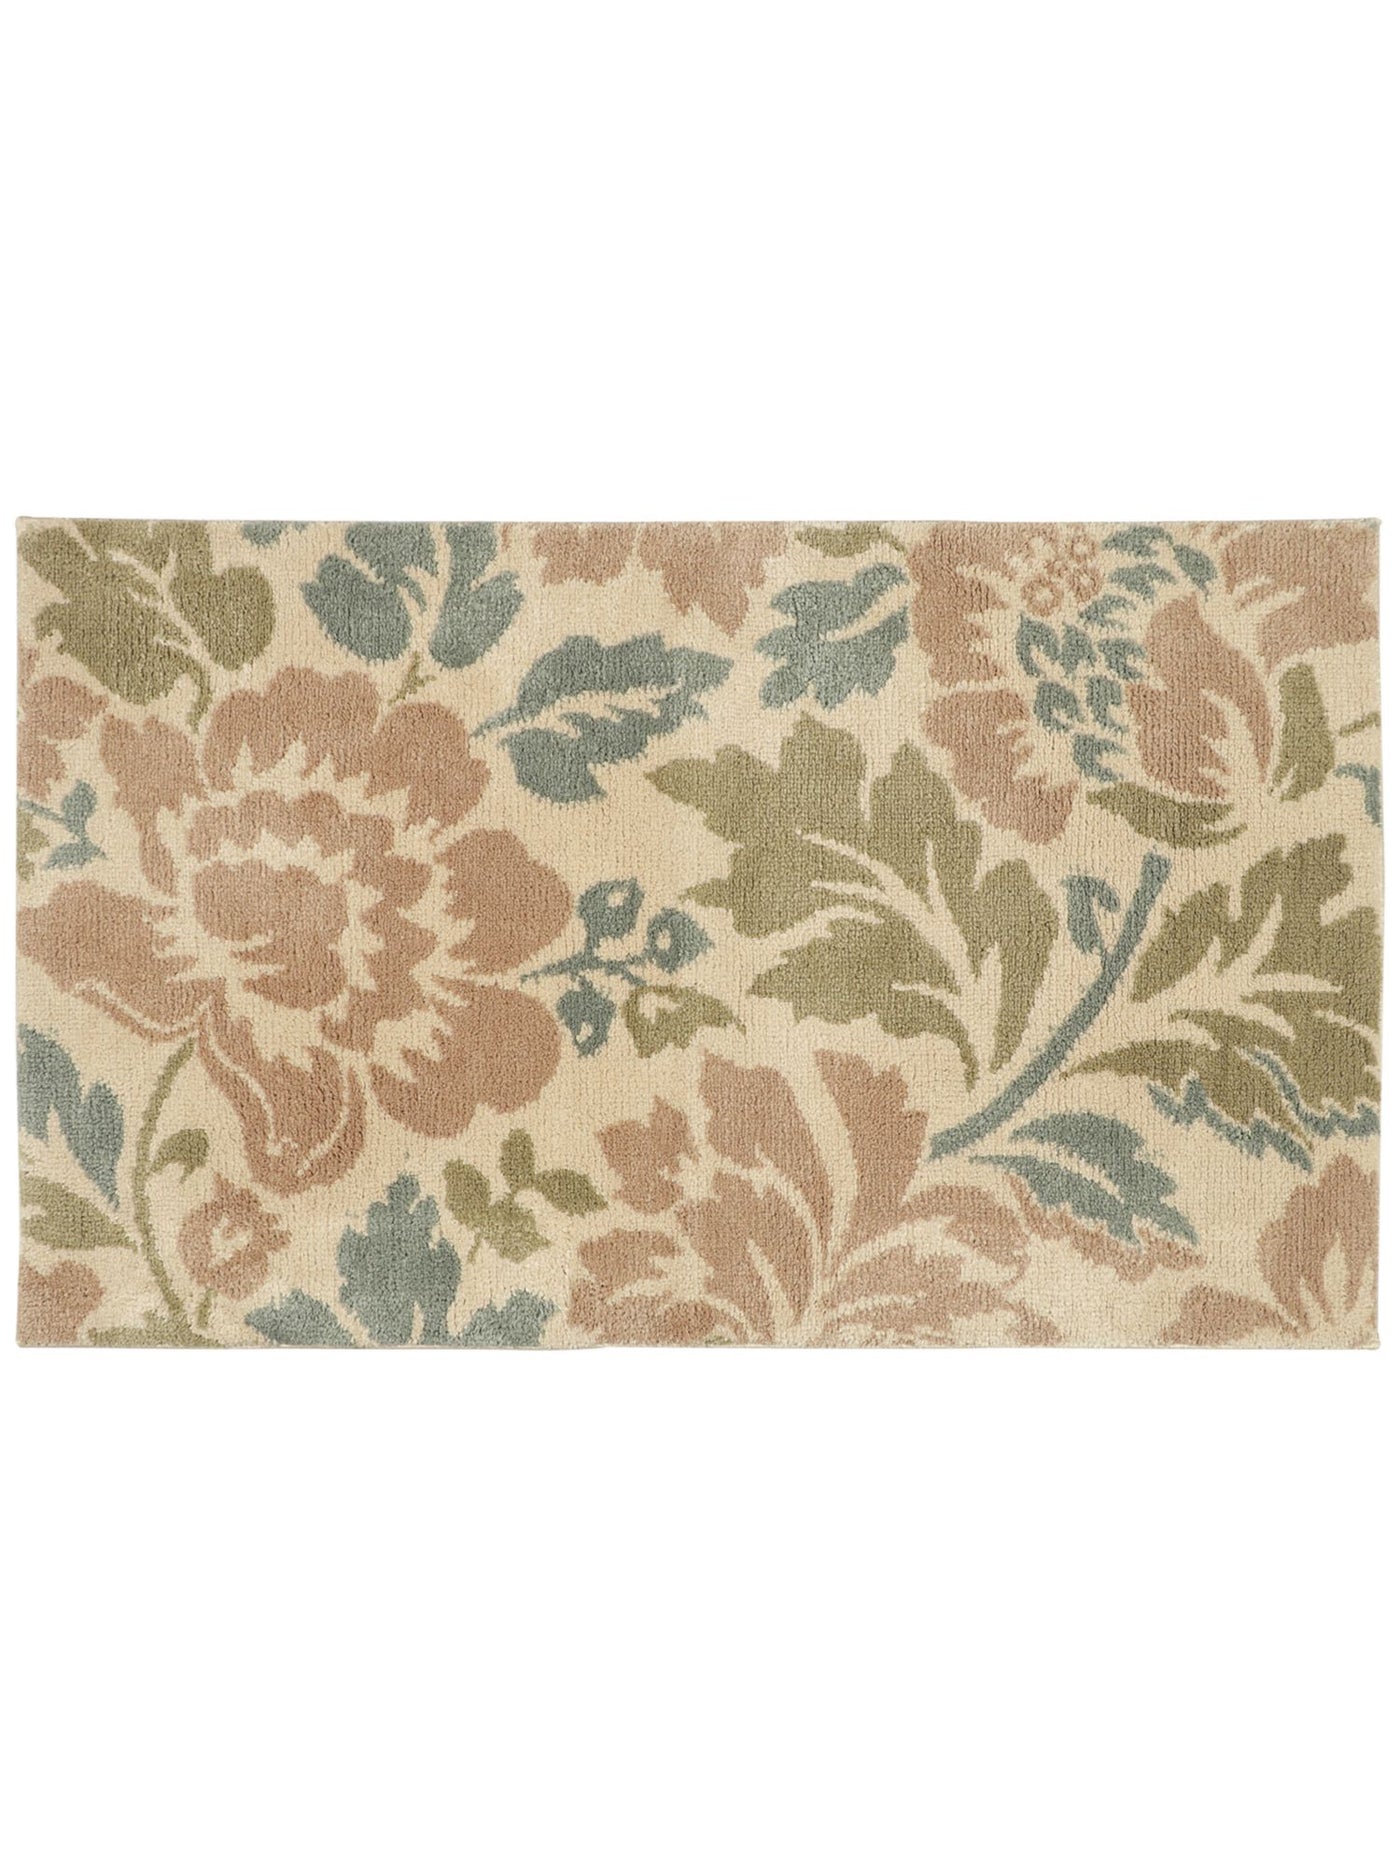 RIVIERA HOME Milady Beige Floral Slip Resistant Stain Resistant All Season 20 x 32 Accent Rug